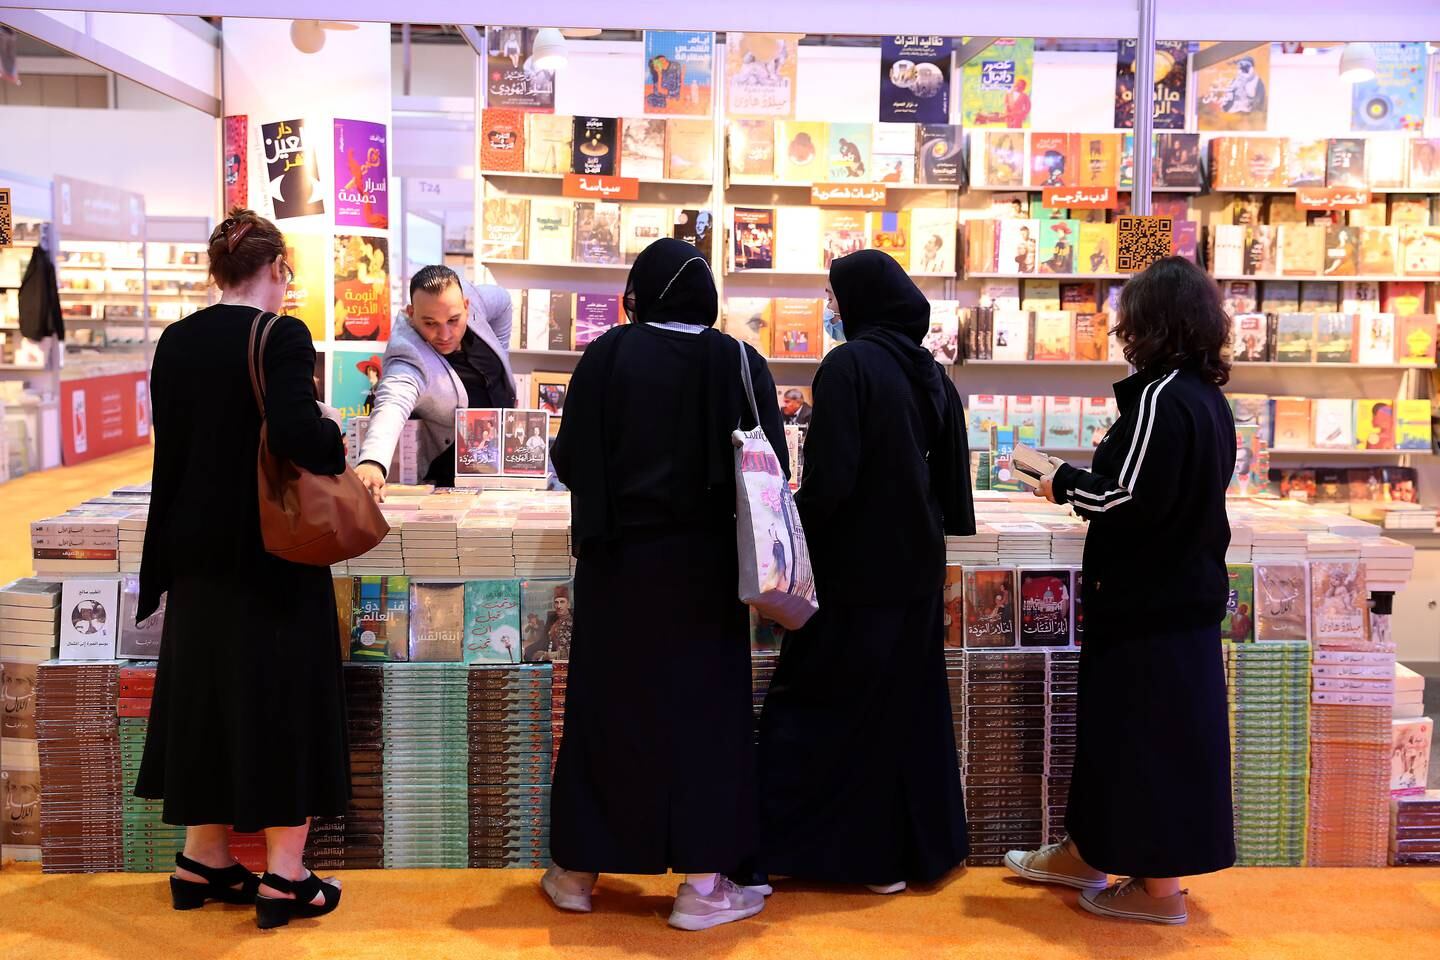 Visitors browsing books on the first day of the Sharjah International Book fair held at Expo centre in Sharjah. Pawan Singh / The National